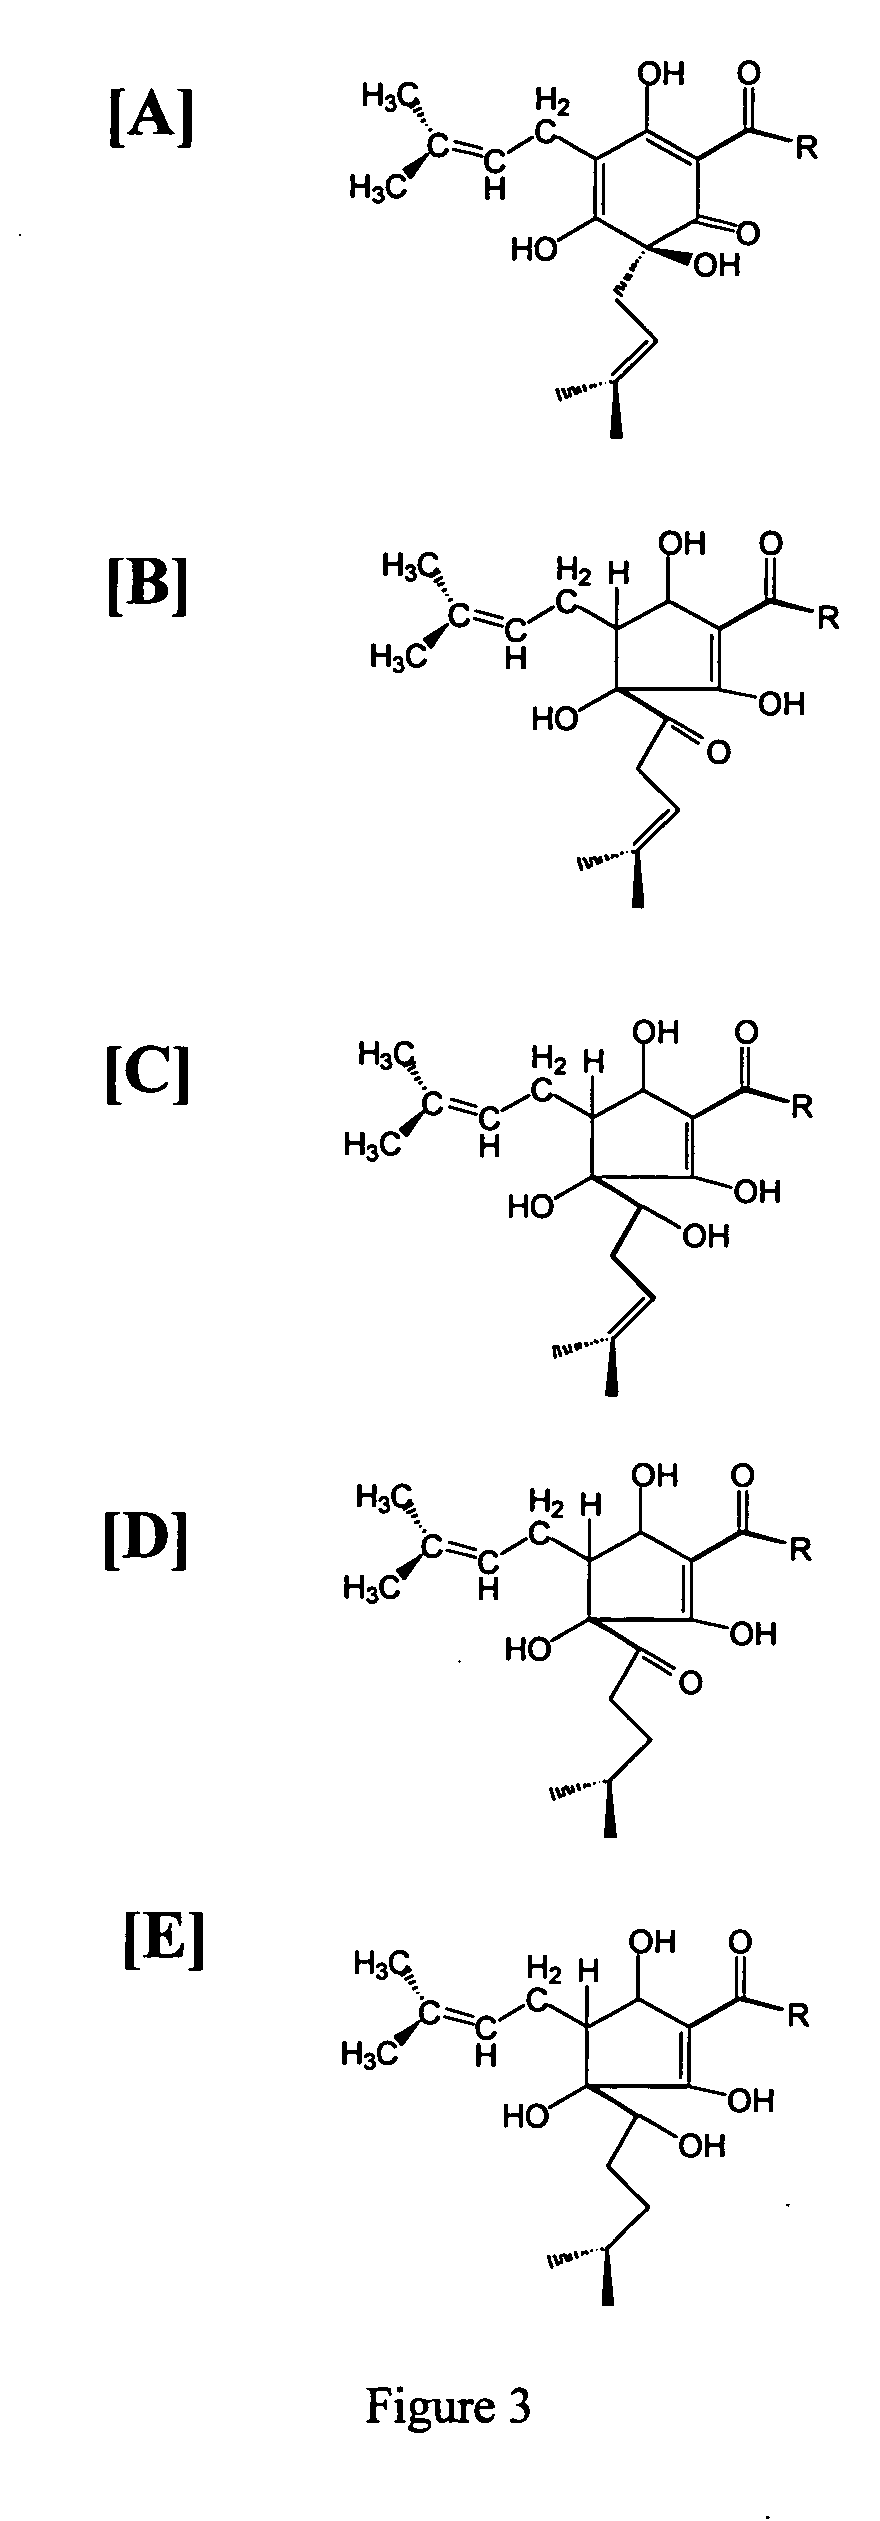 Synergistic anti-inflammatory pharmaceutical compositions and related methods using curcuminoids or methylxanthines